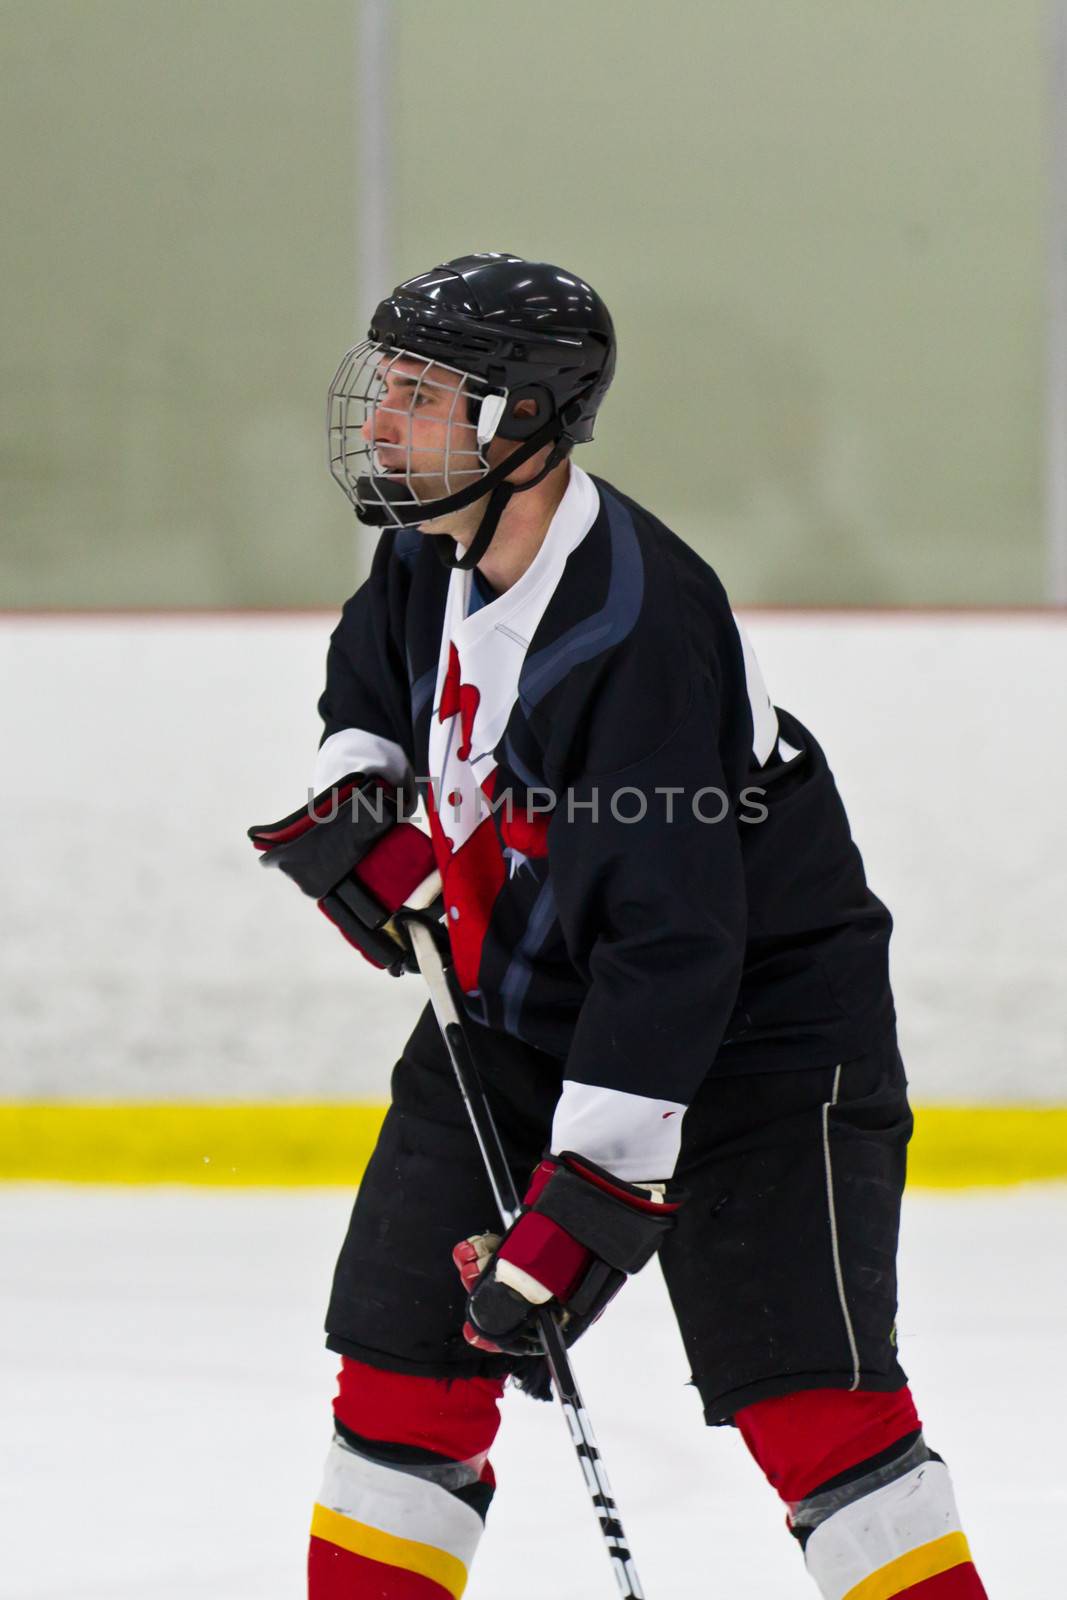 Hockey player in action during a game by bigjohn36